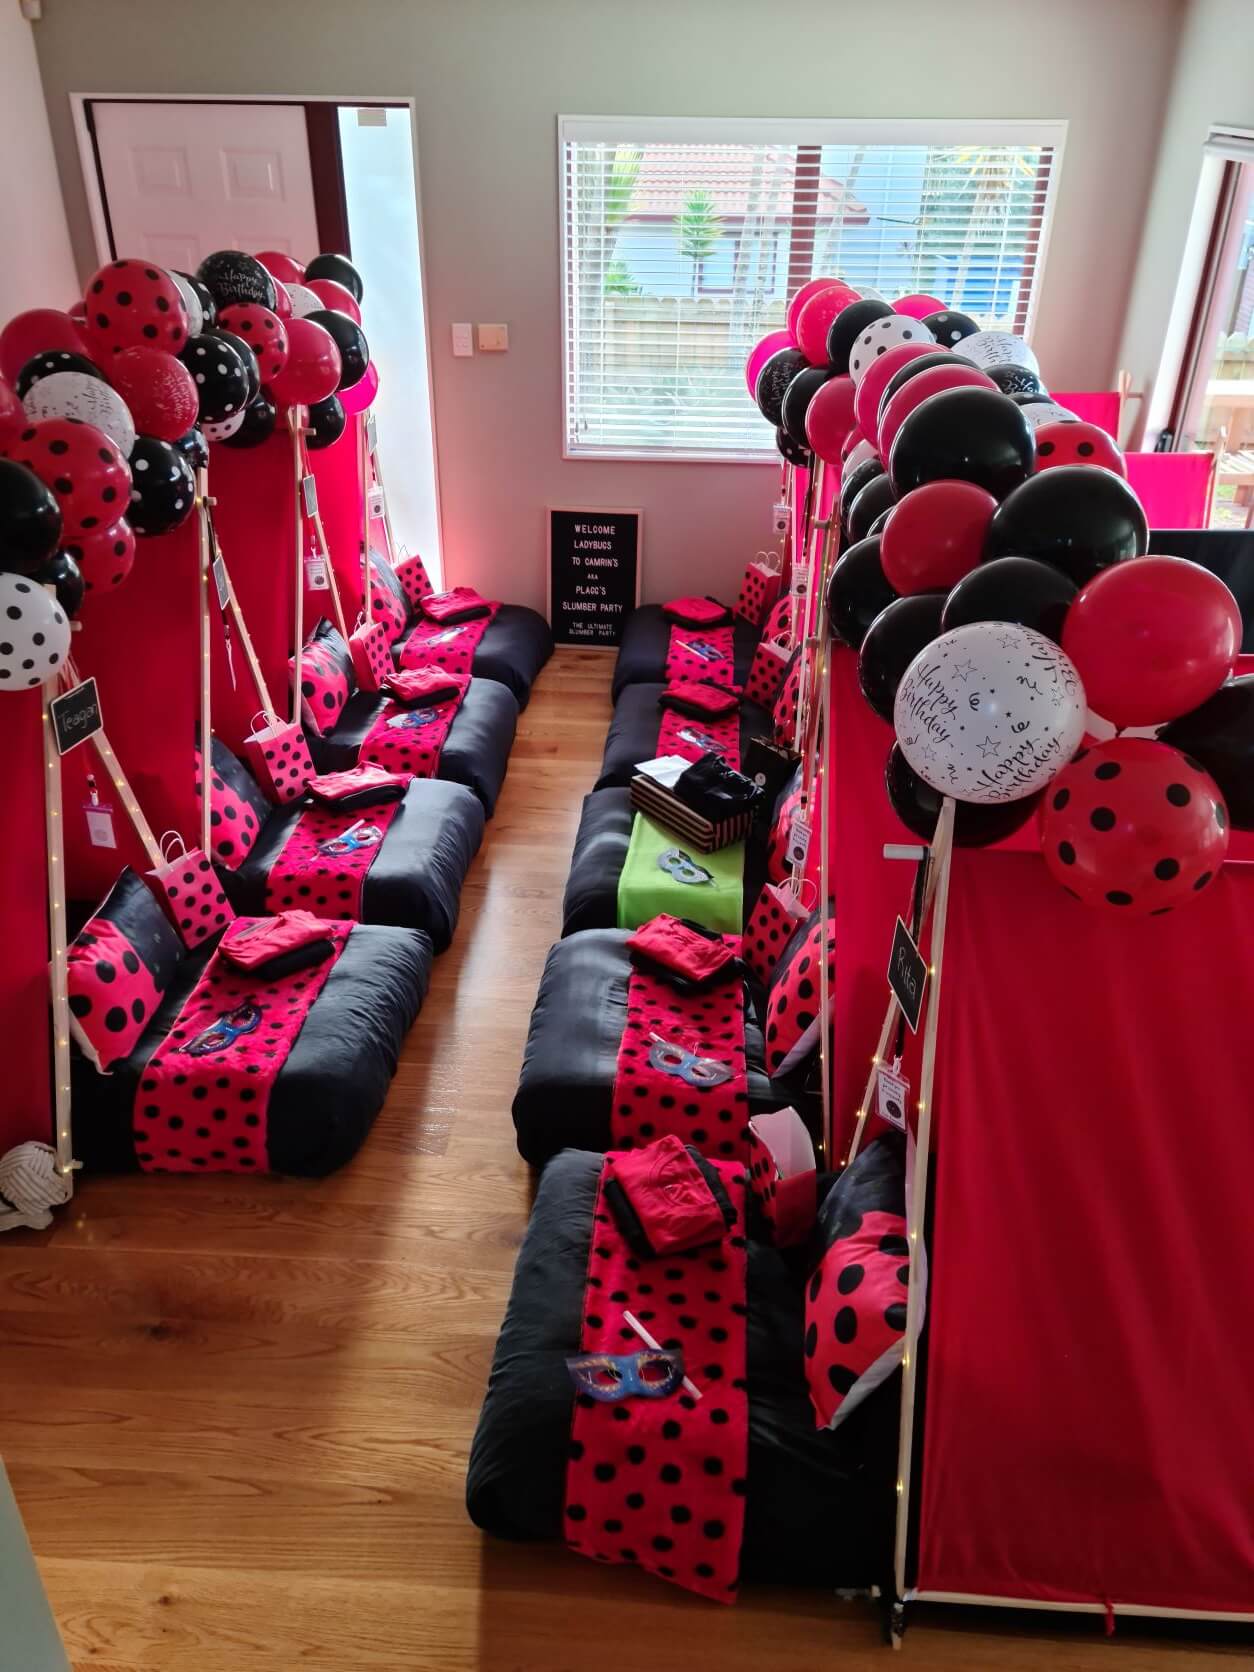 Miraculous Tales of Ladybug Teepee Party